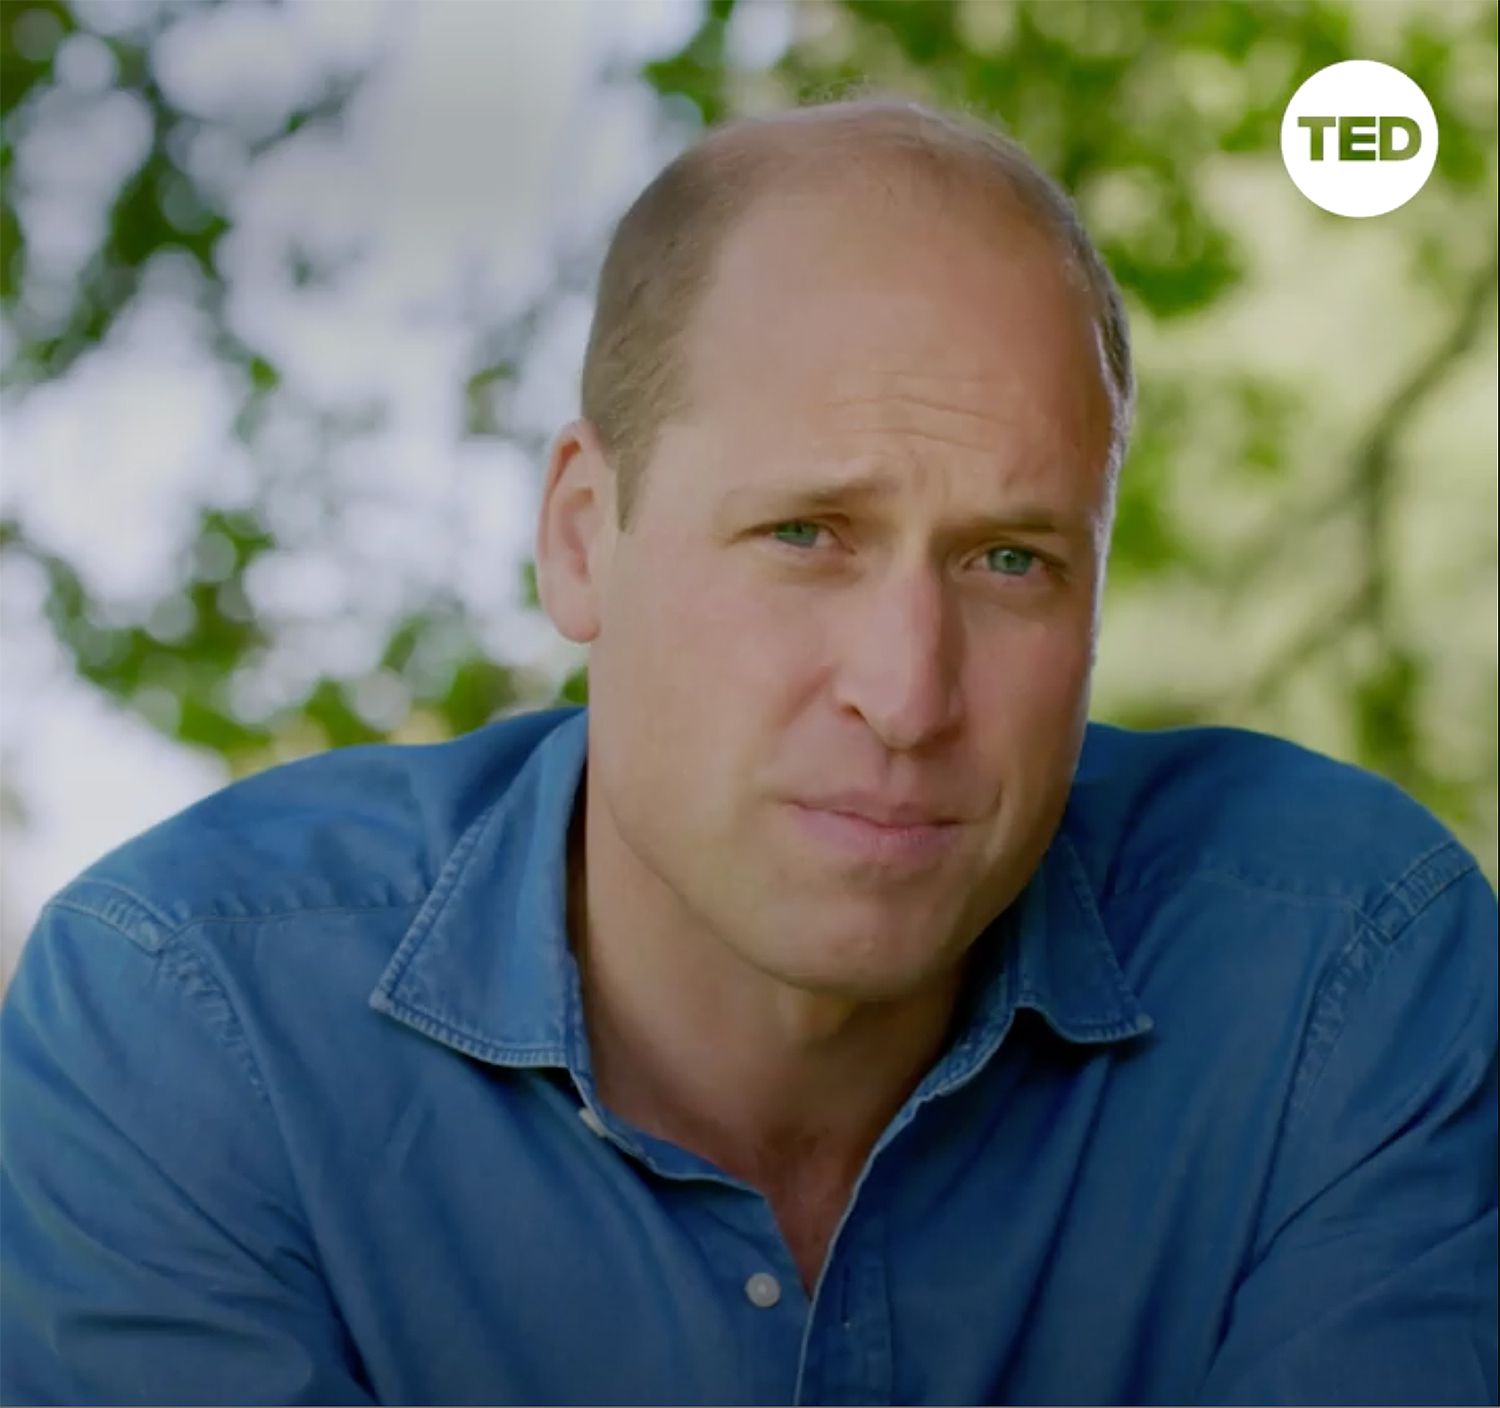 Prince William Makes His TED Talk Debut! See a Sneak Peek of His Historic Talk - PEOPLE